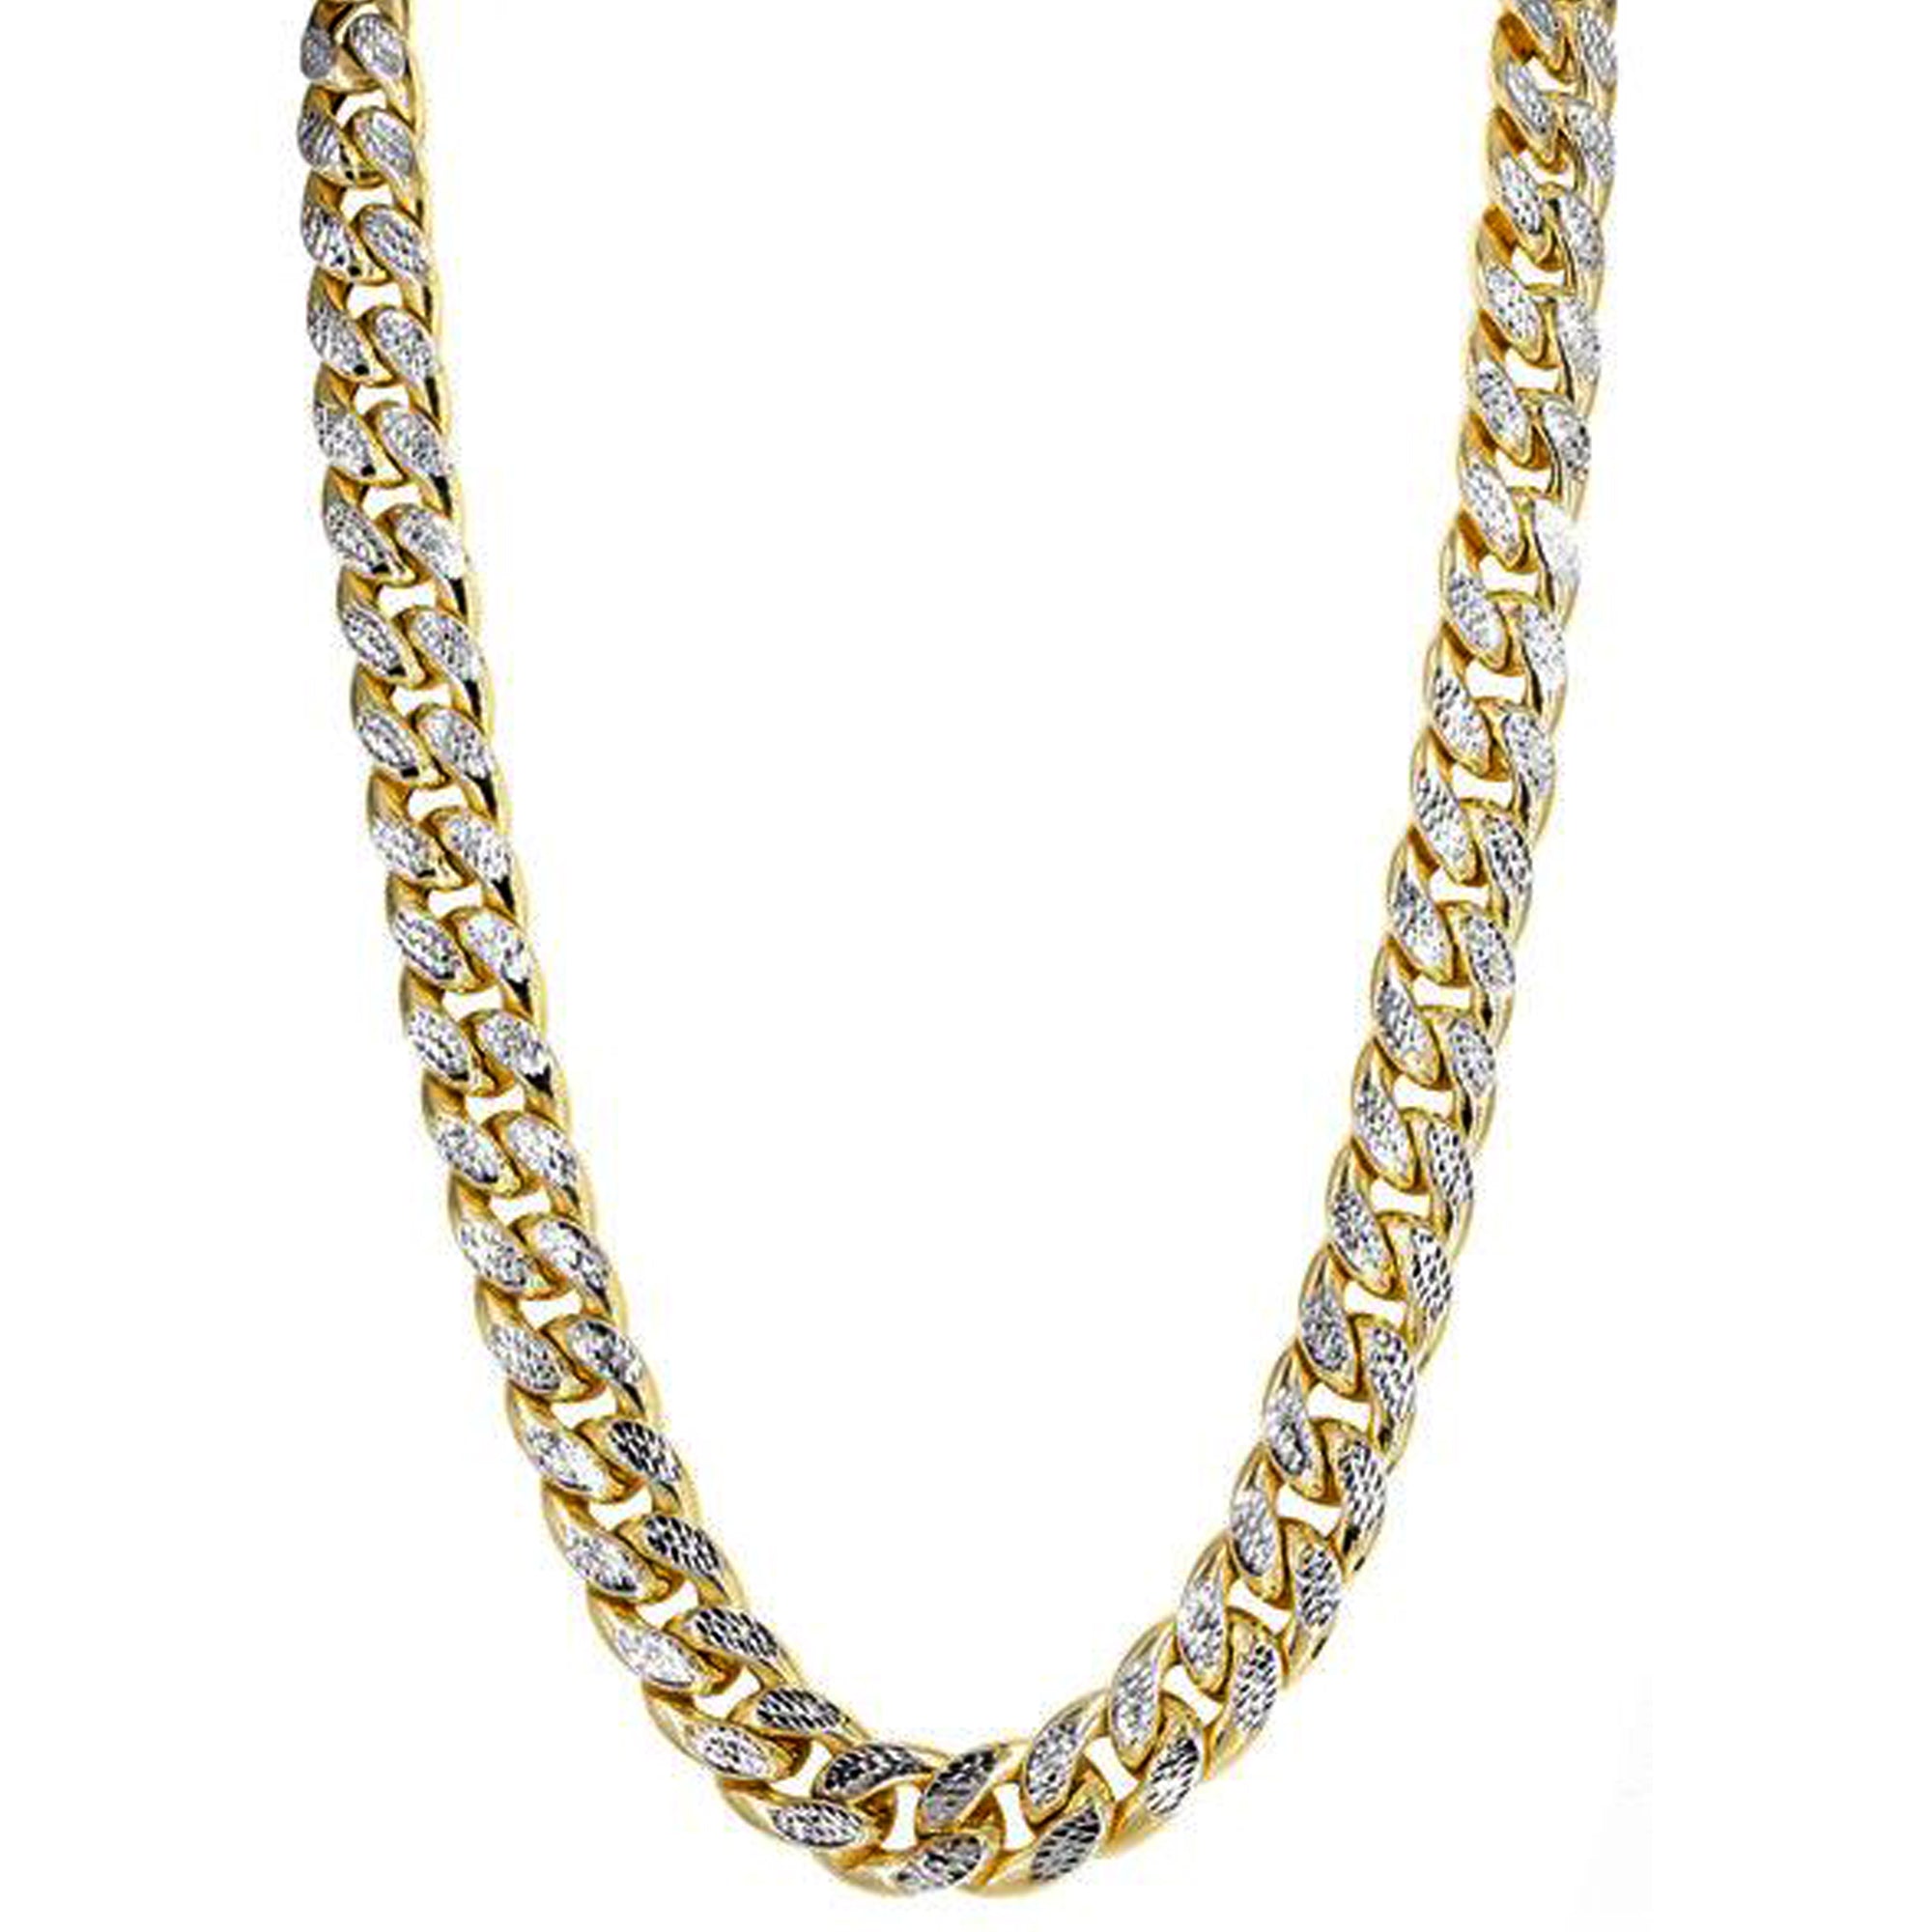 14k Yellow And White Gold Miami Cuban Pave Link Chain Necklace, Width 9.5mm, 22" fine designer jewelry for men and women